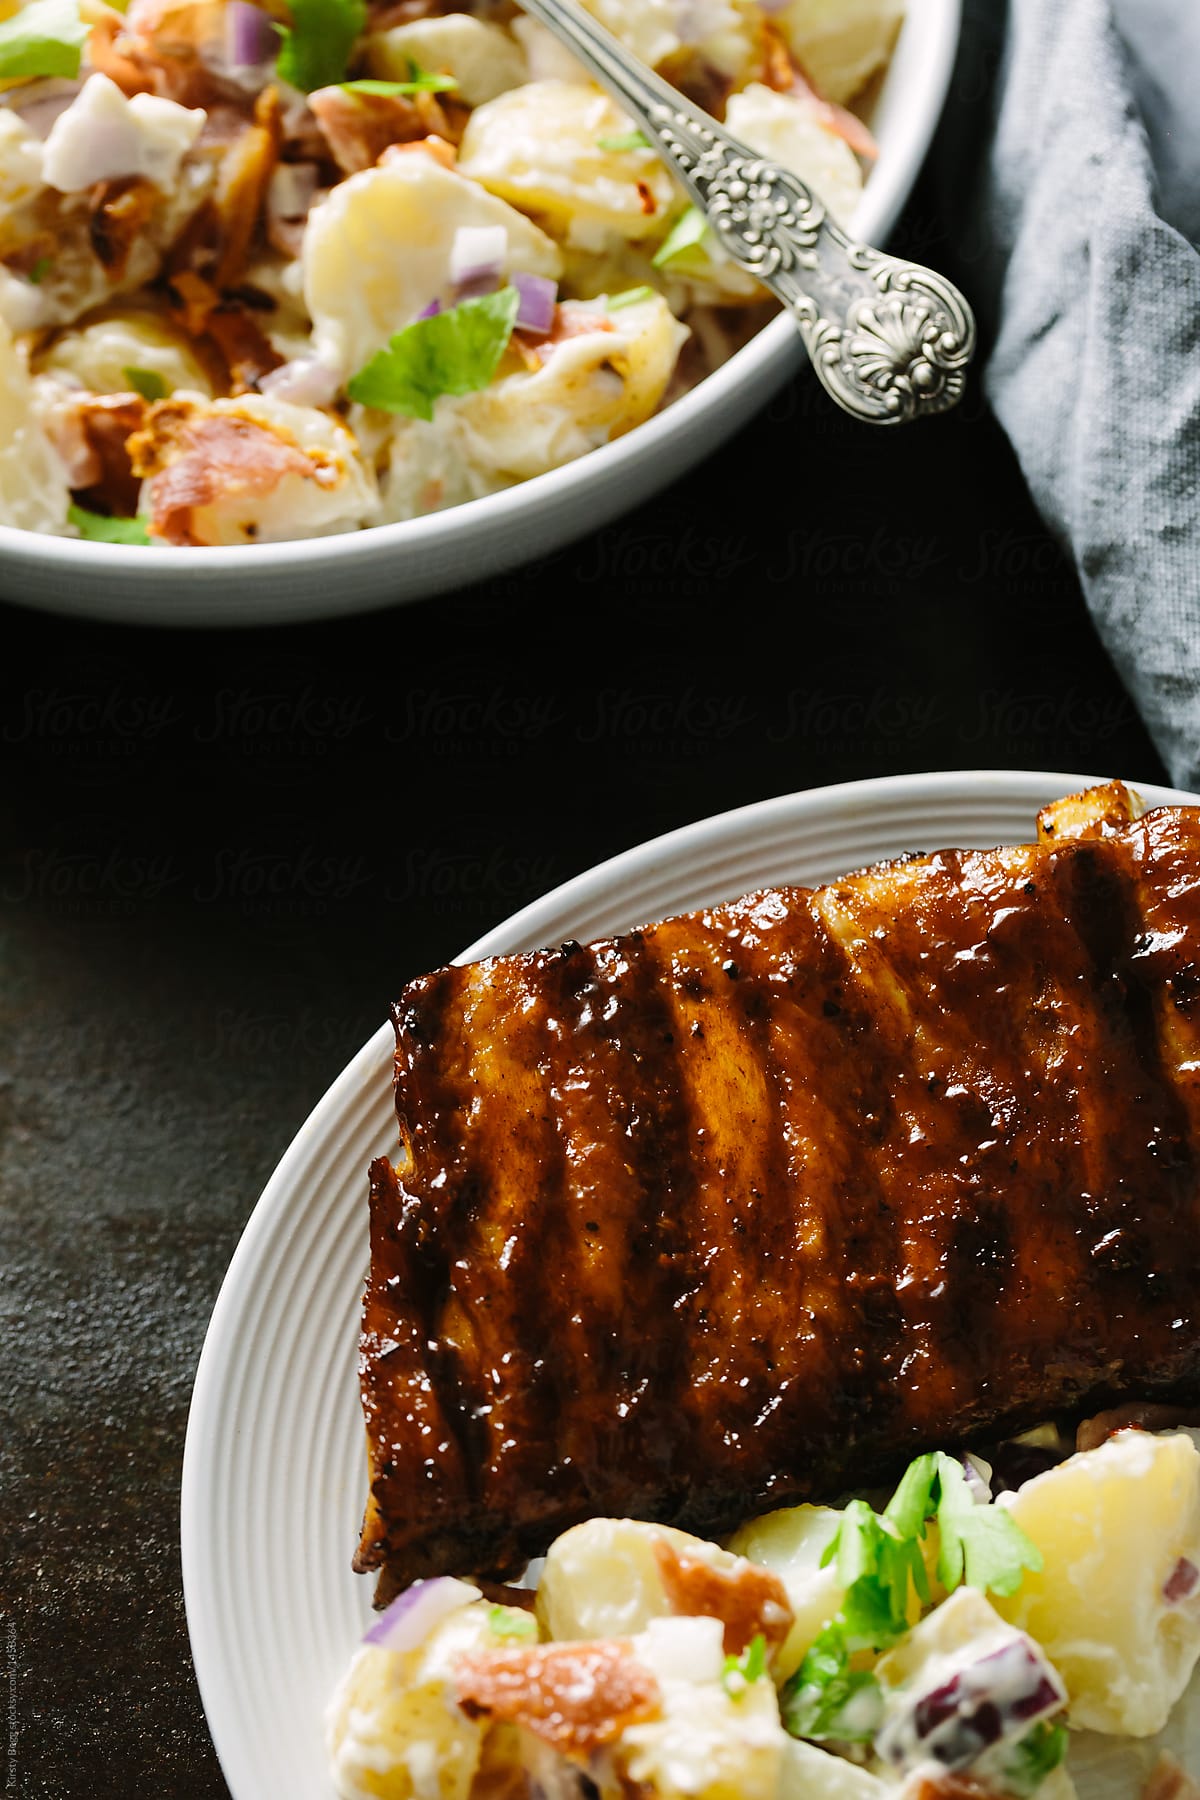 Plate of ribs with bowl of potato salad